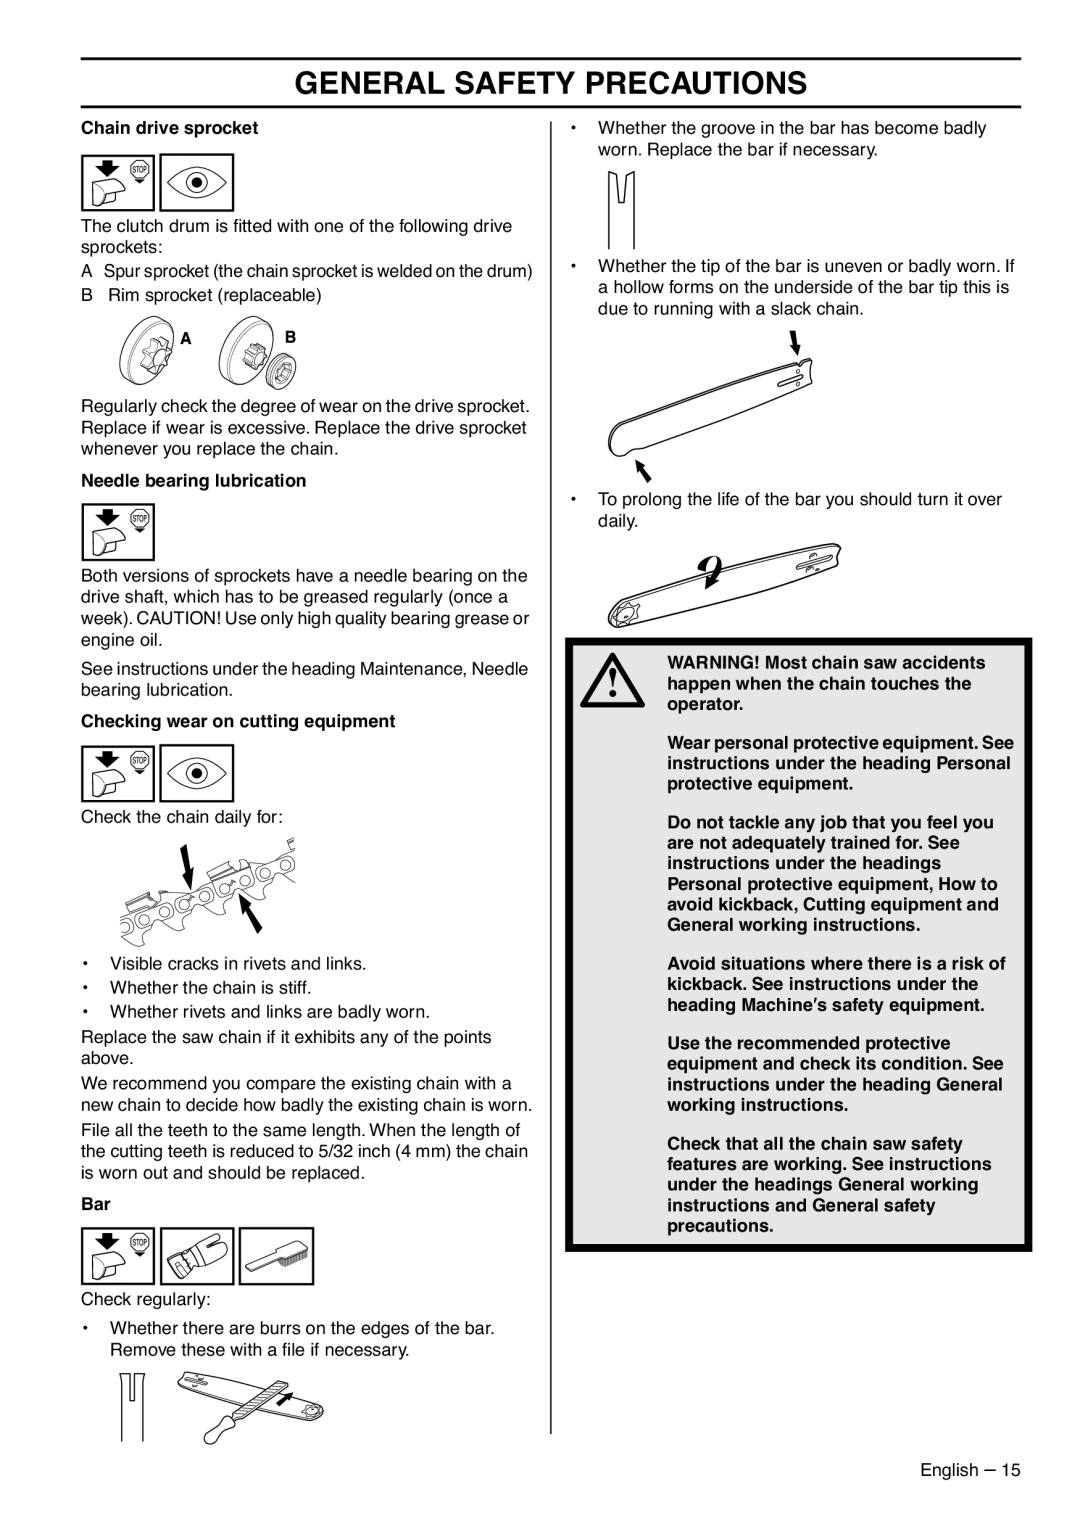 RedMax G5300 manual General Safety Precautions 